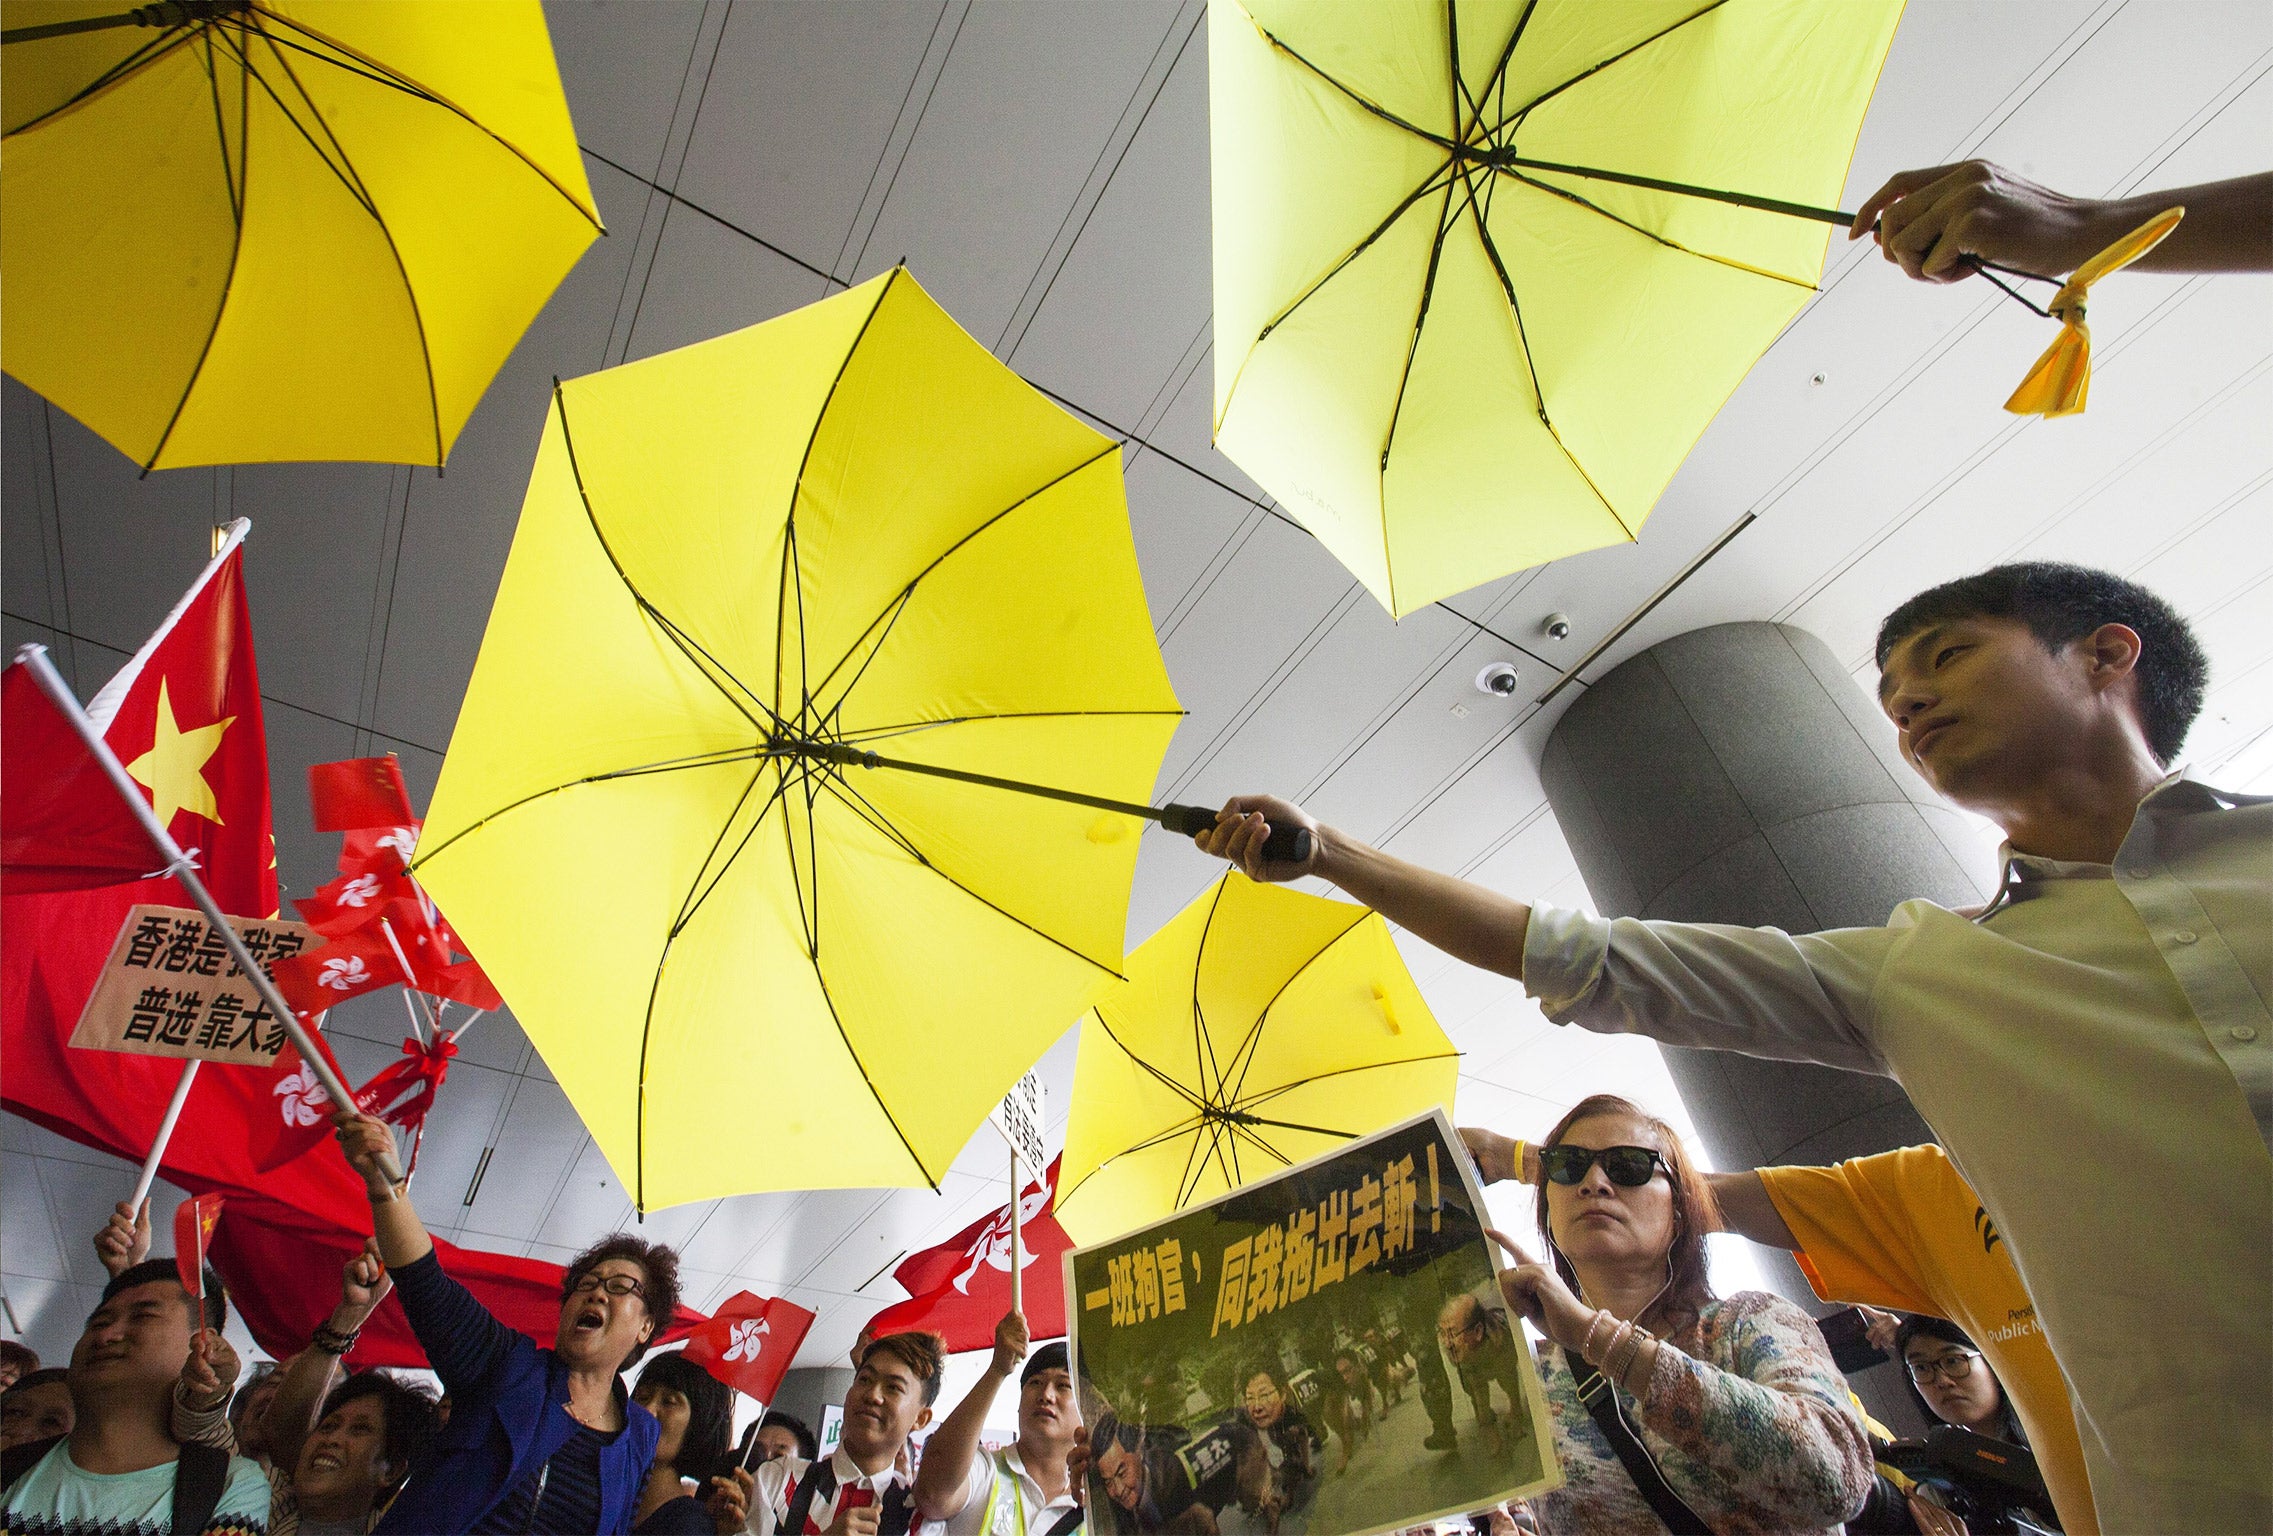 Flag-waving supporters of the reform plans clash with umbrella-wielding pan-democracy campaigners on Wednesday